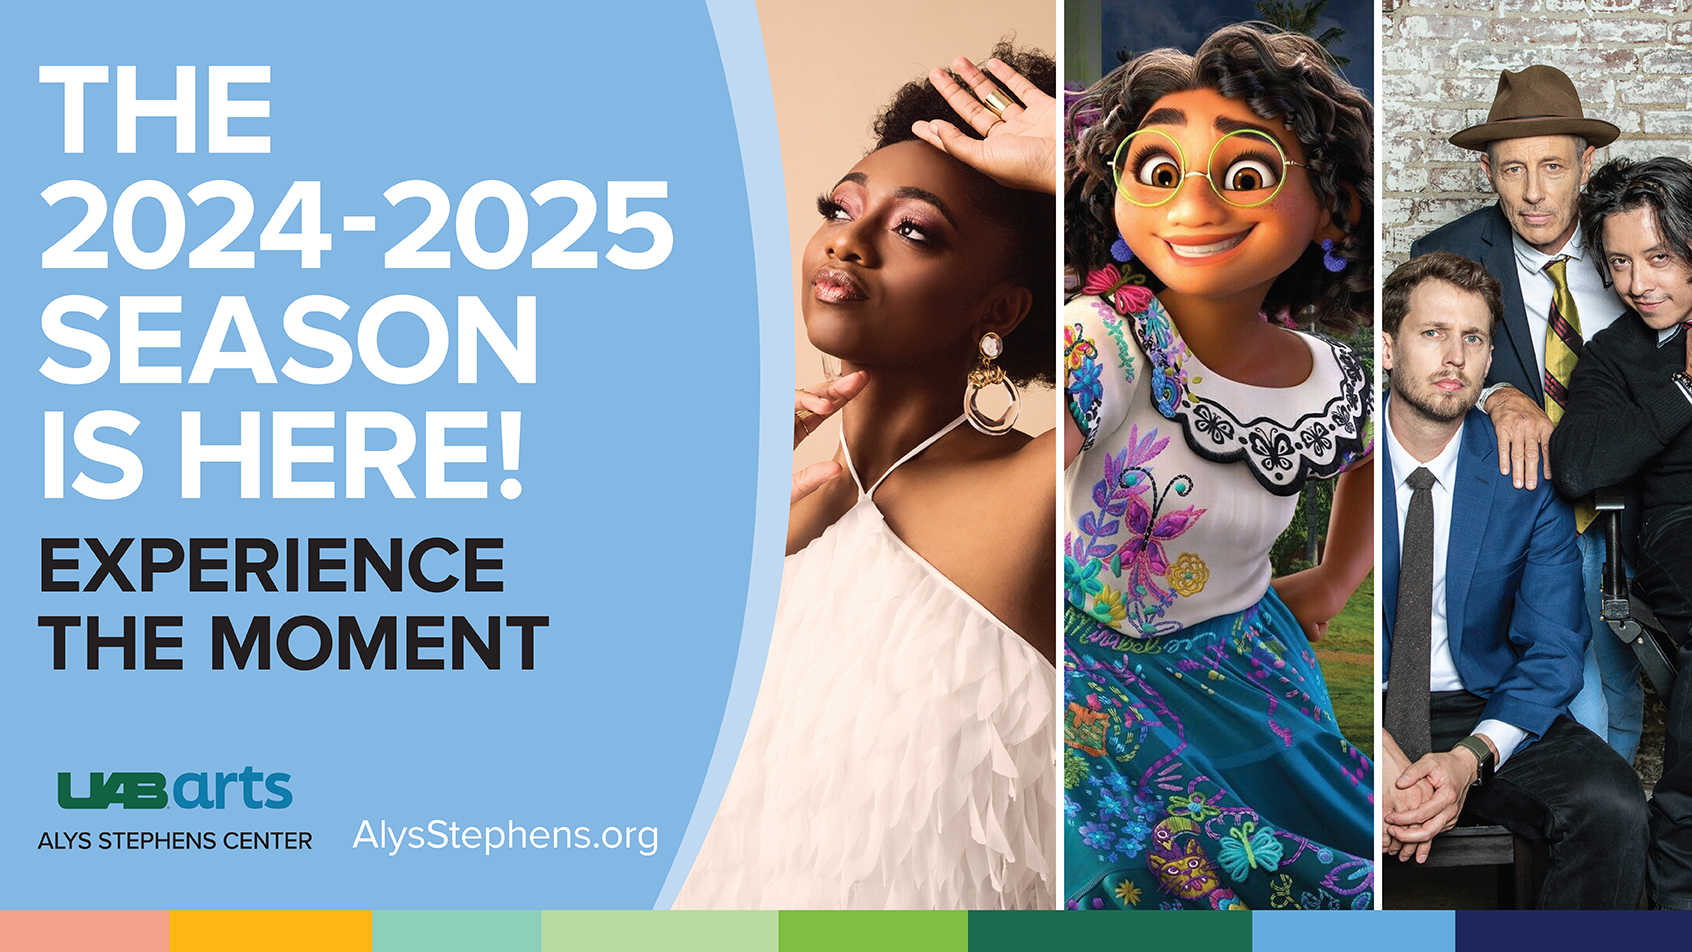 The 2024-2025 season is here! Experience the moment. UAB Arts: Alys Stephens Center.